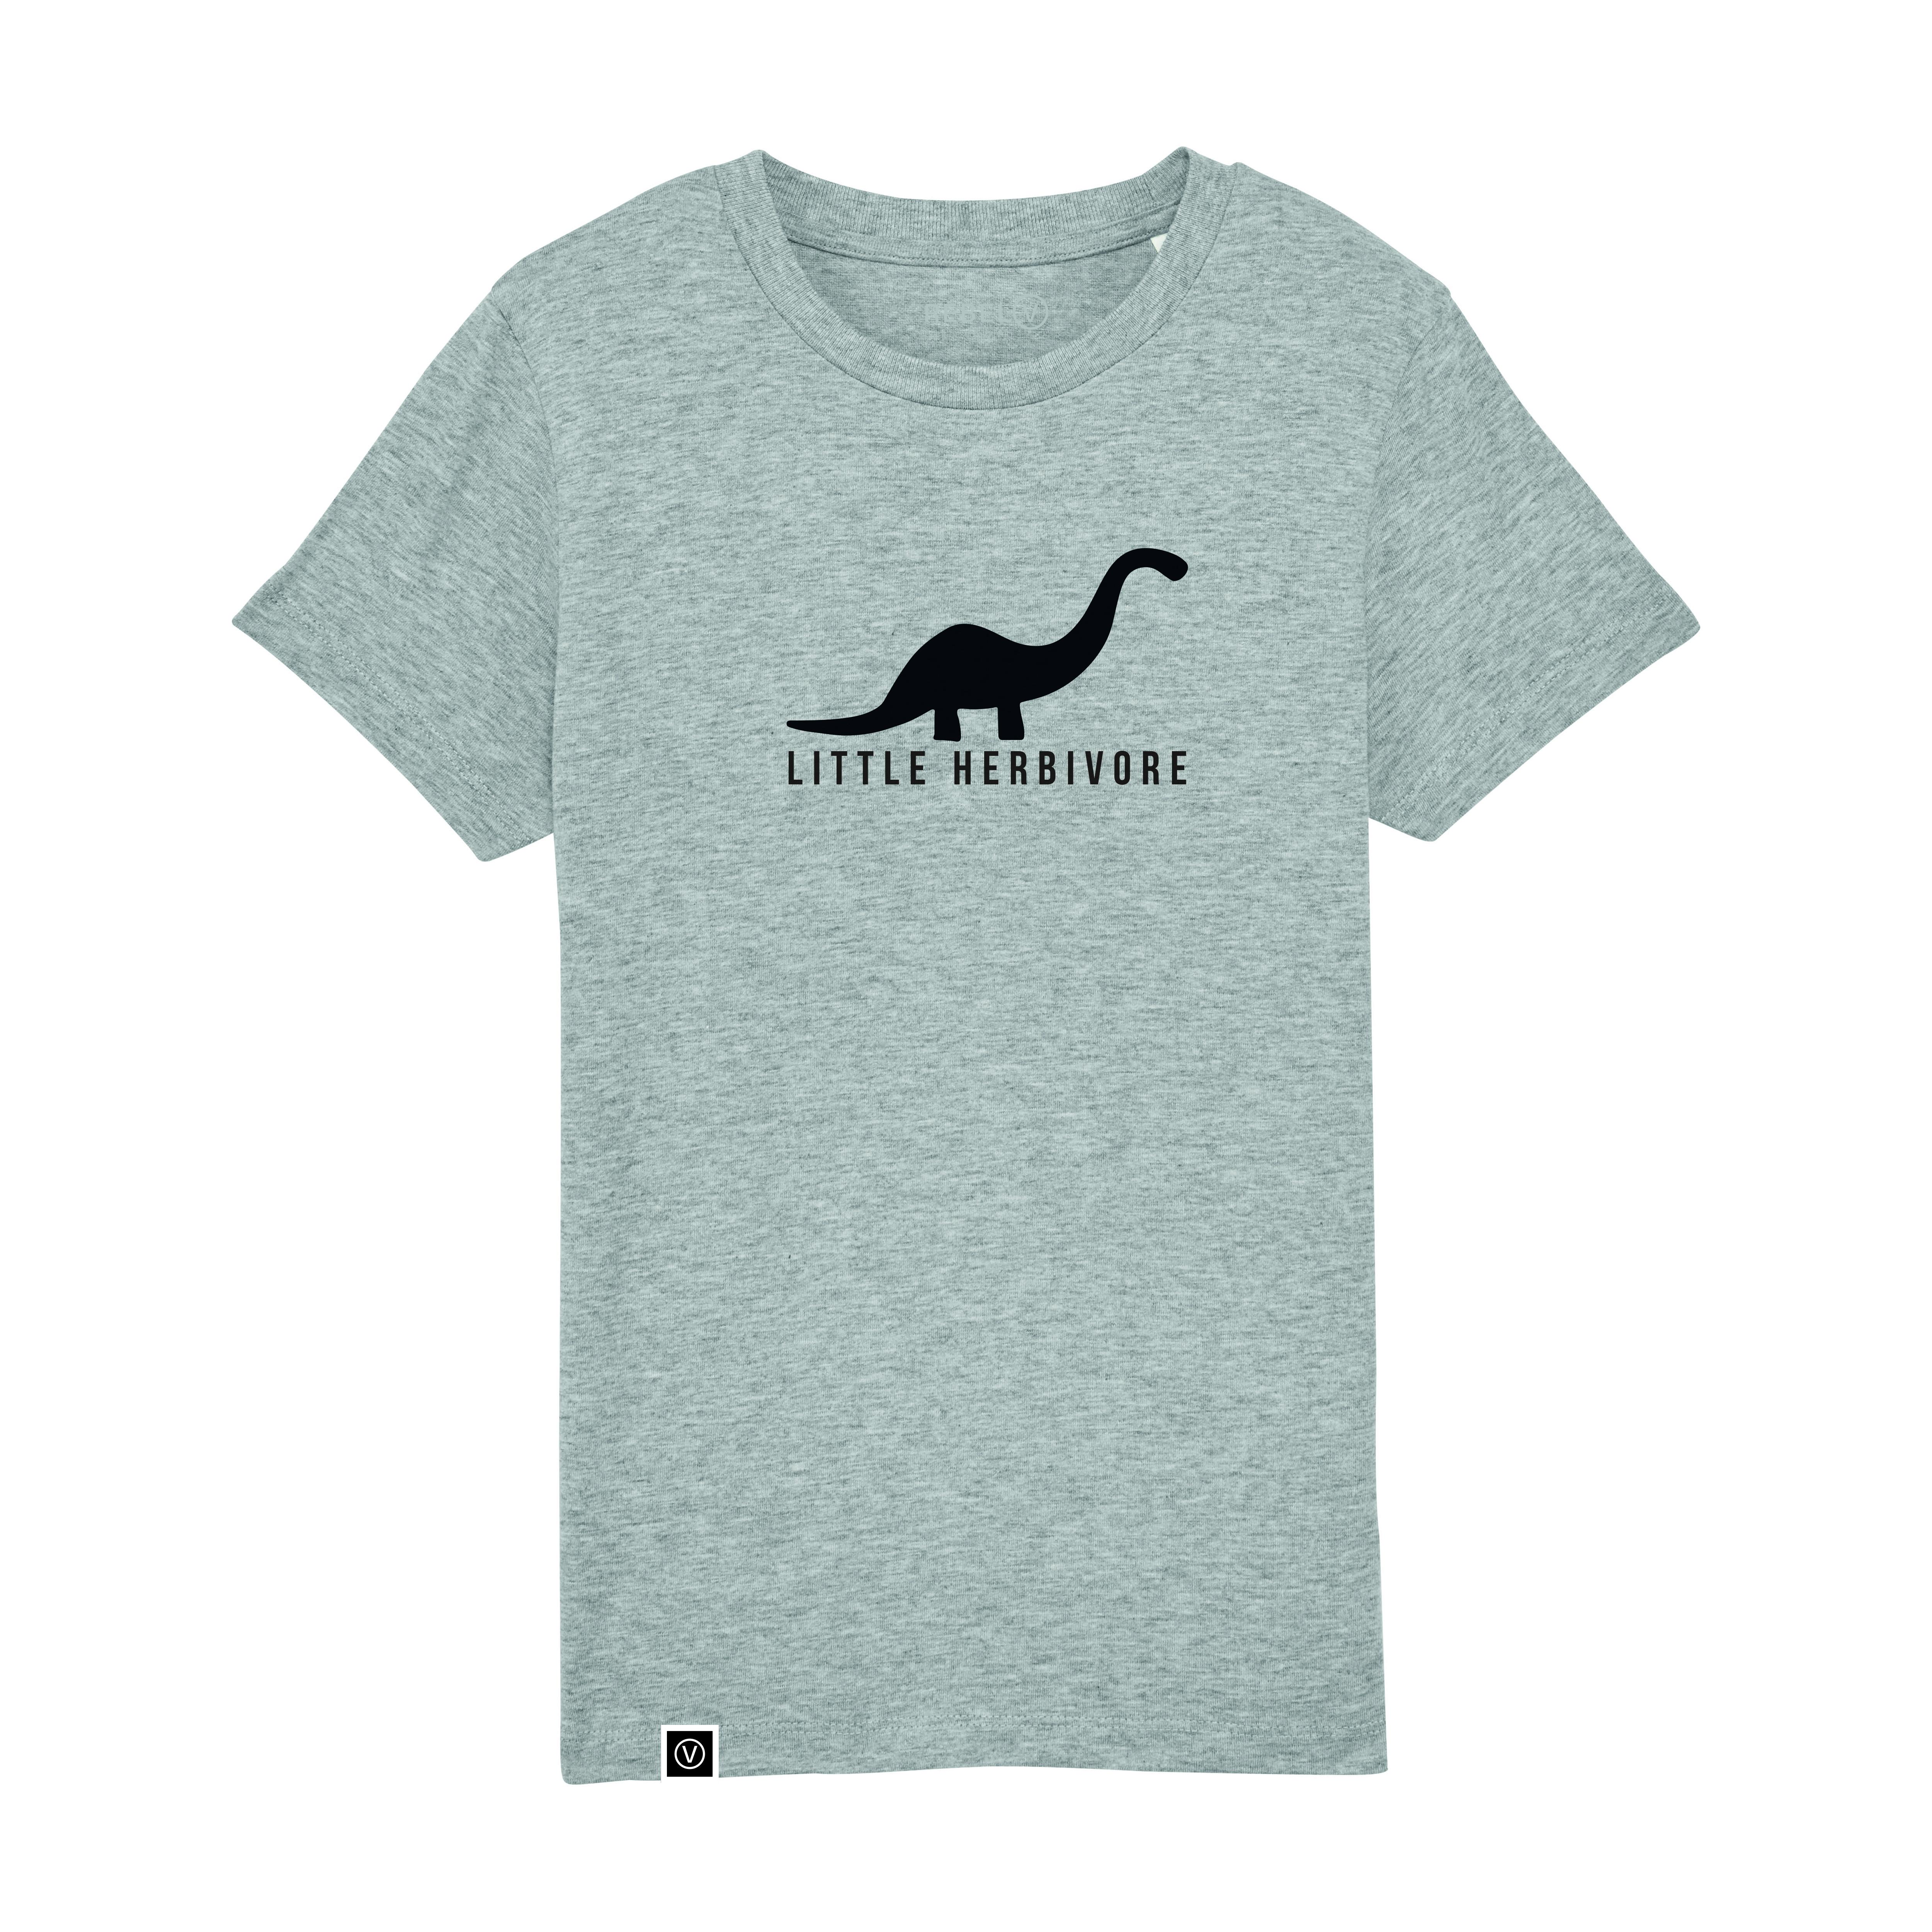 Heather grey t-shirt on a white background. Black dinosaur on centre chest with the word little herbivore in black underneath. Small white square label on bottom right hem with a white V in a white circle on a black background.